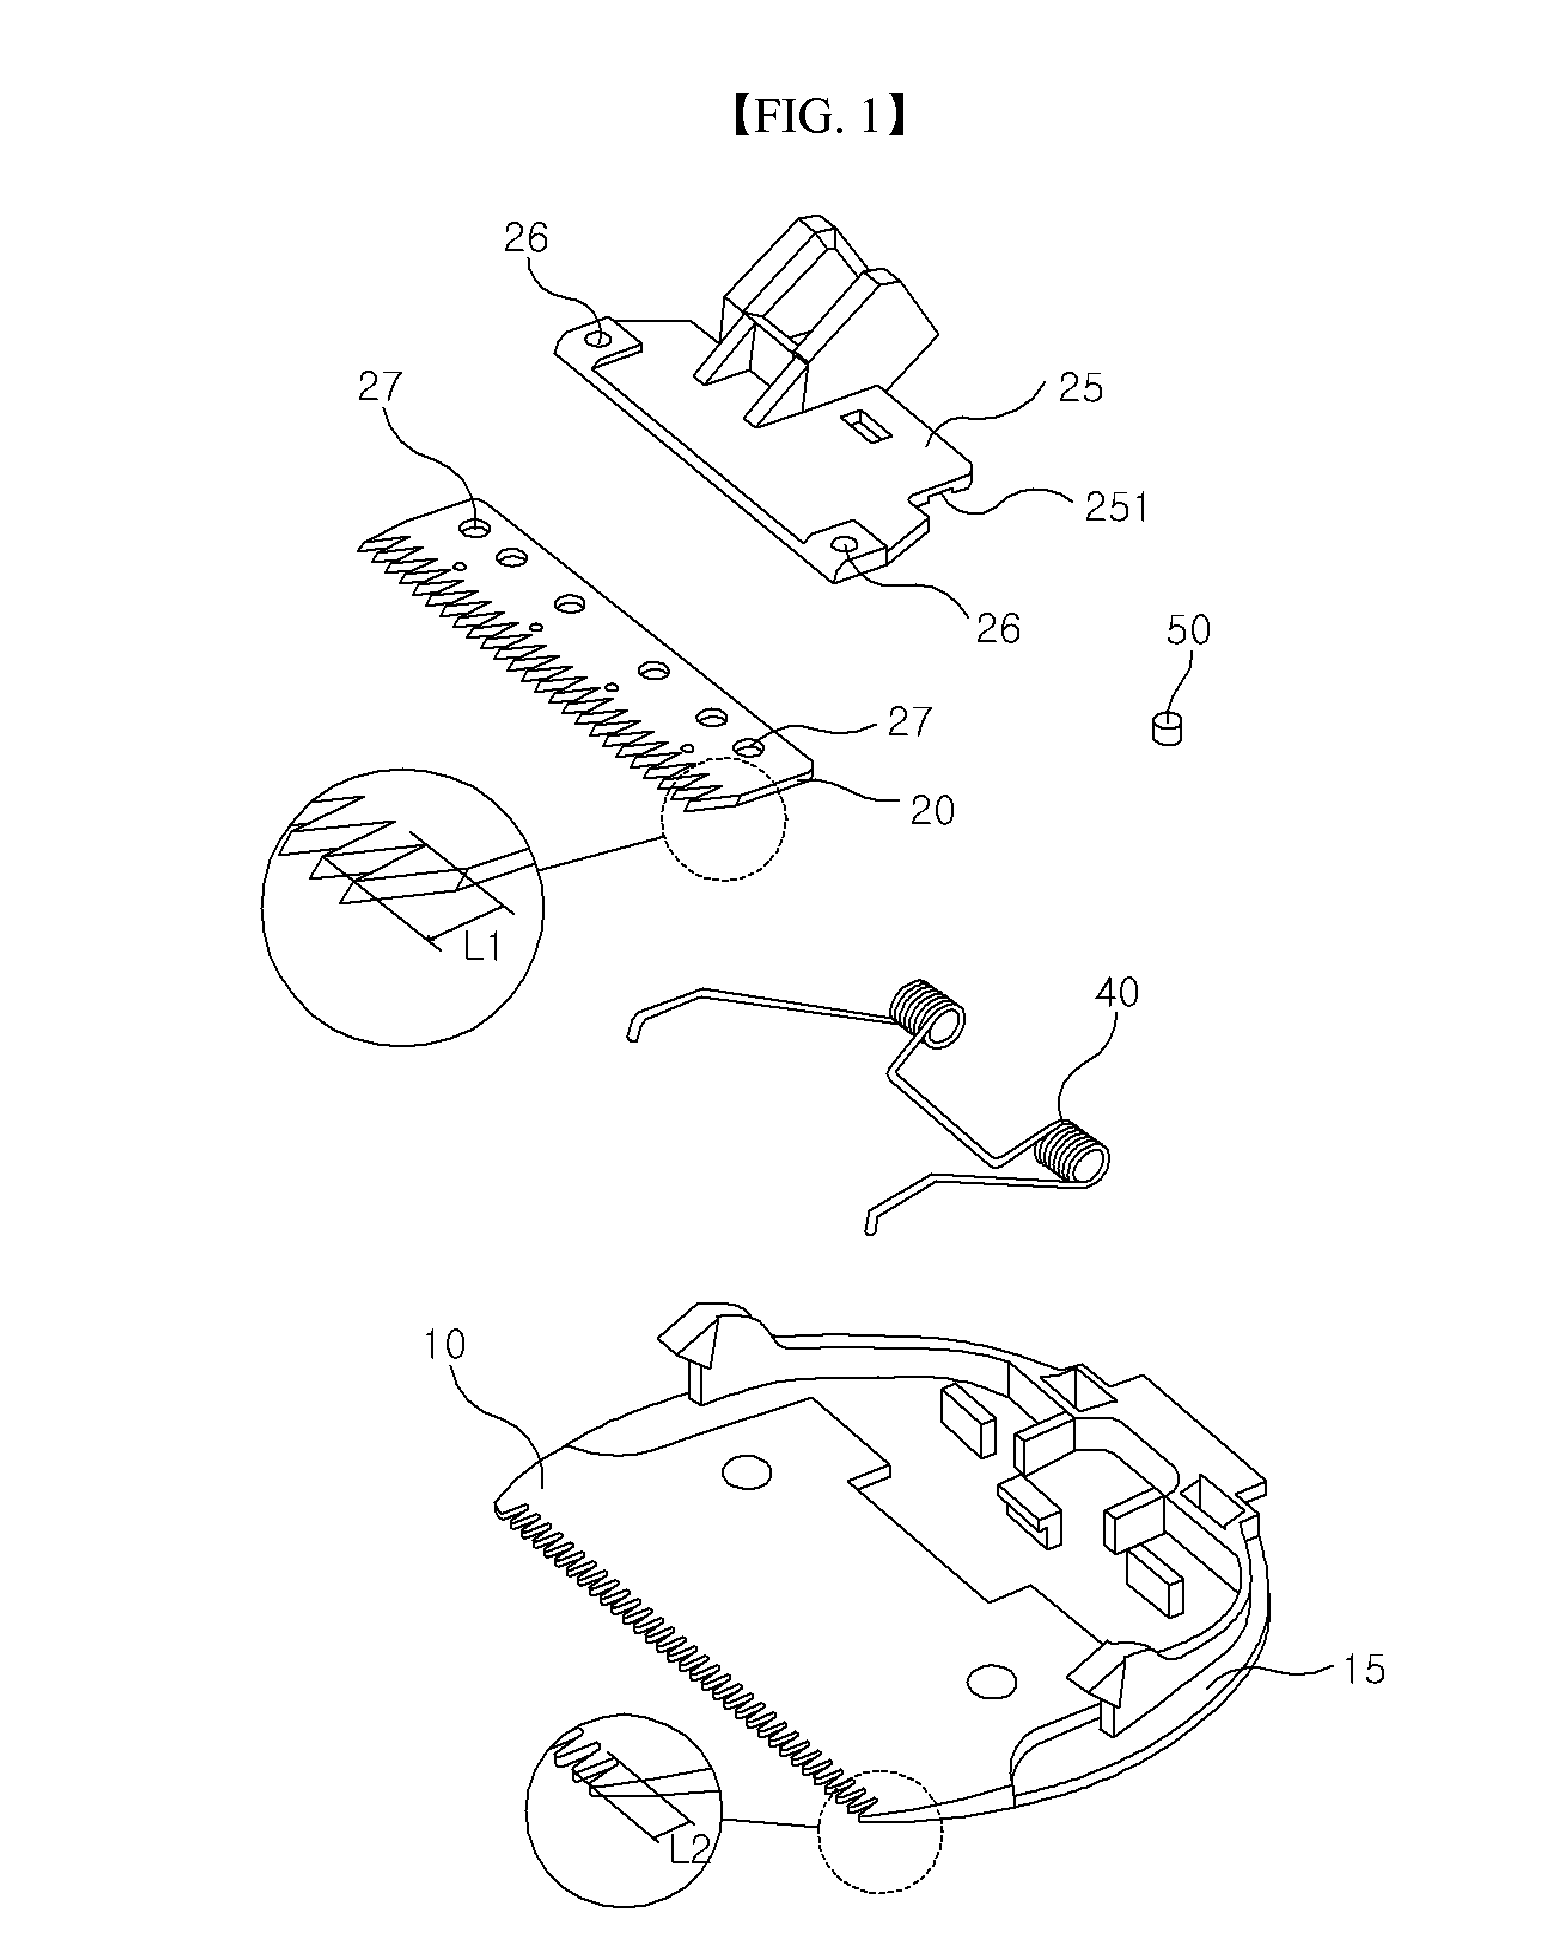 Hair clipper blade assembly